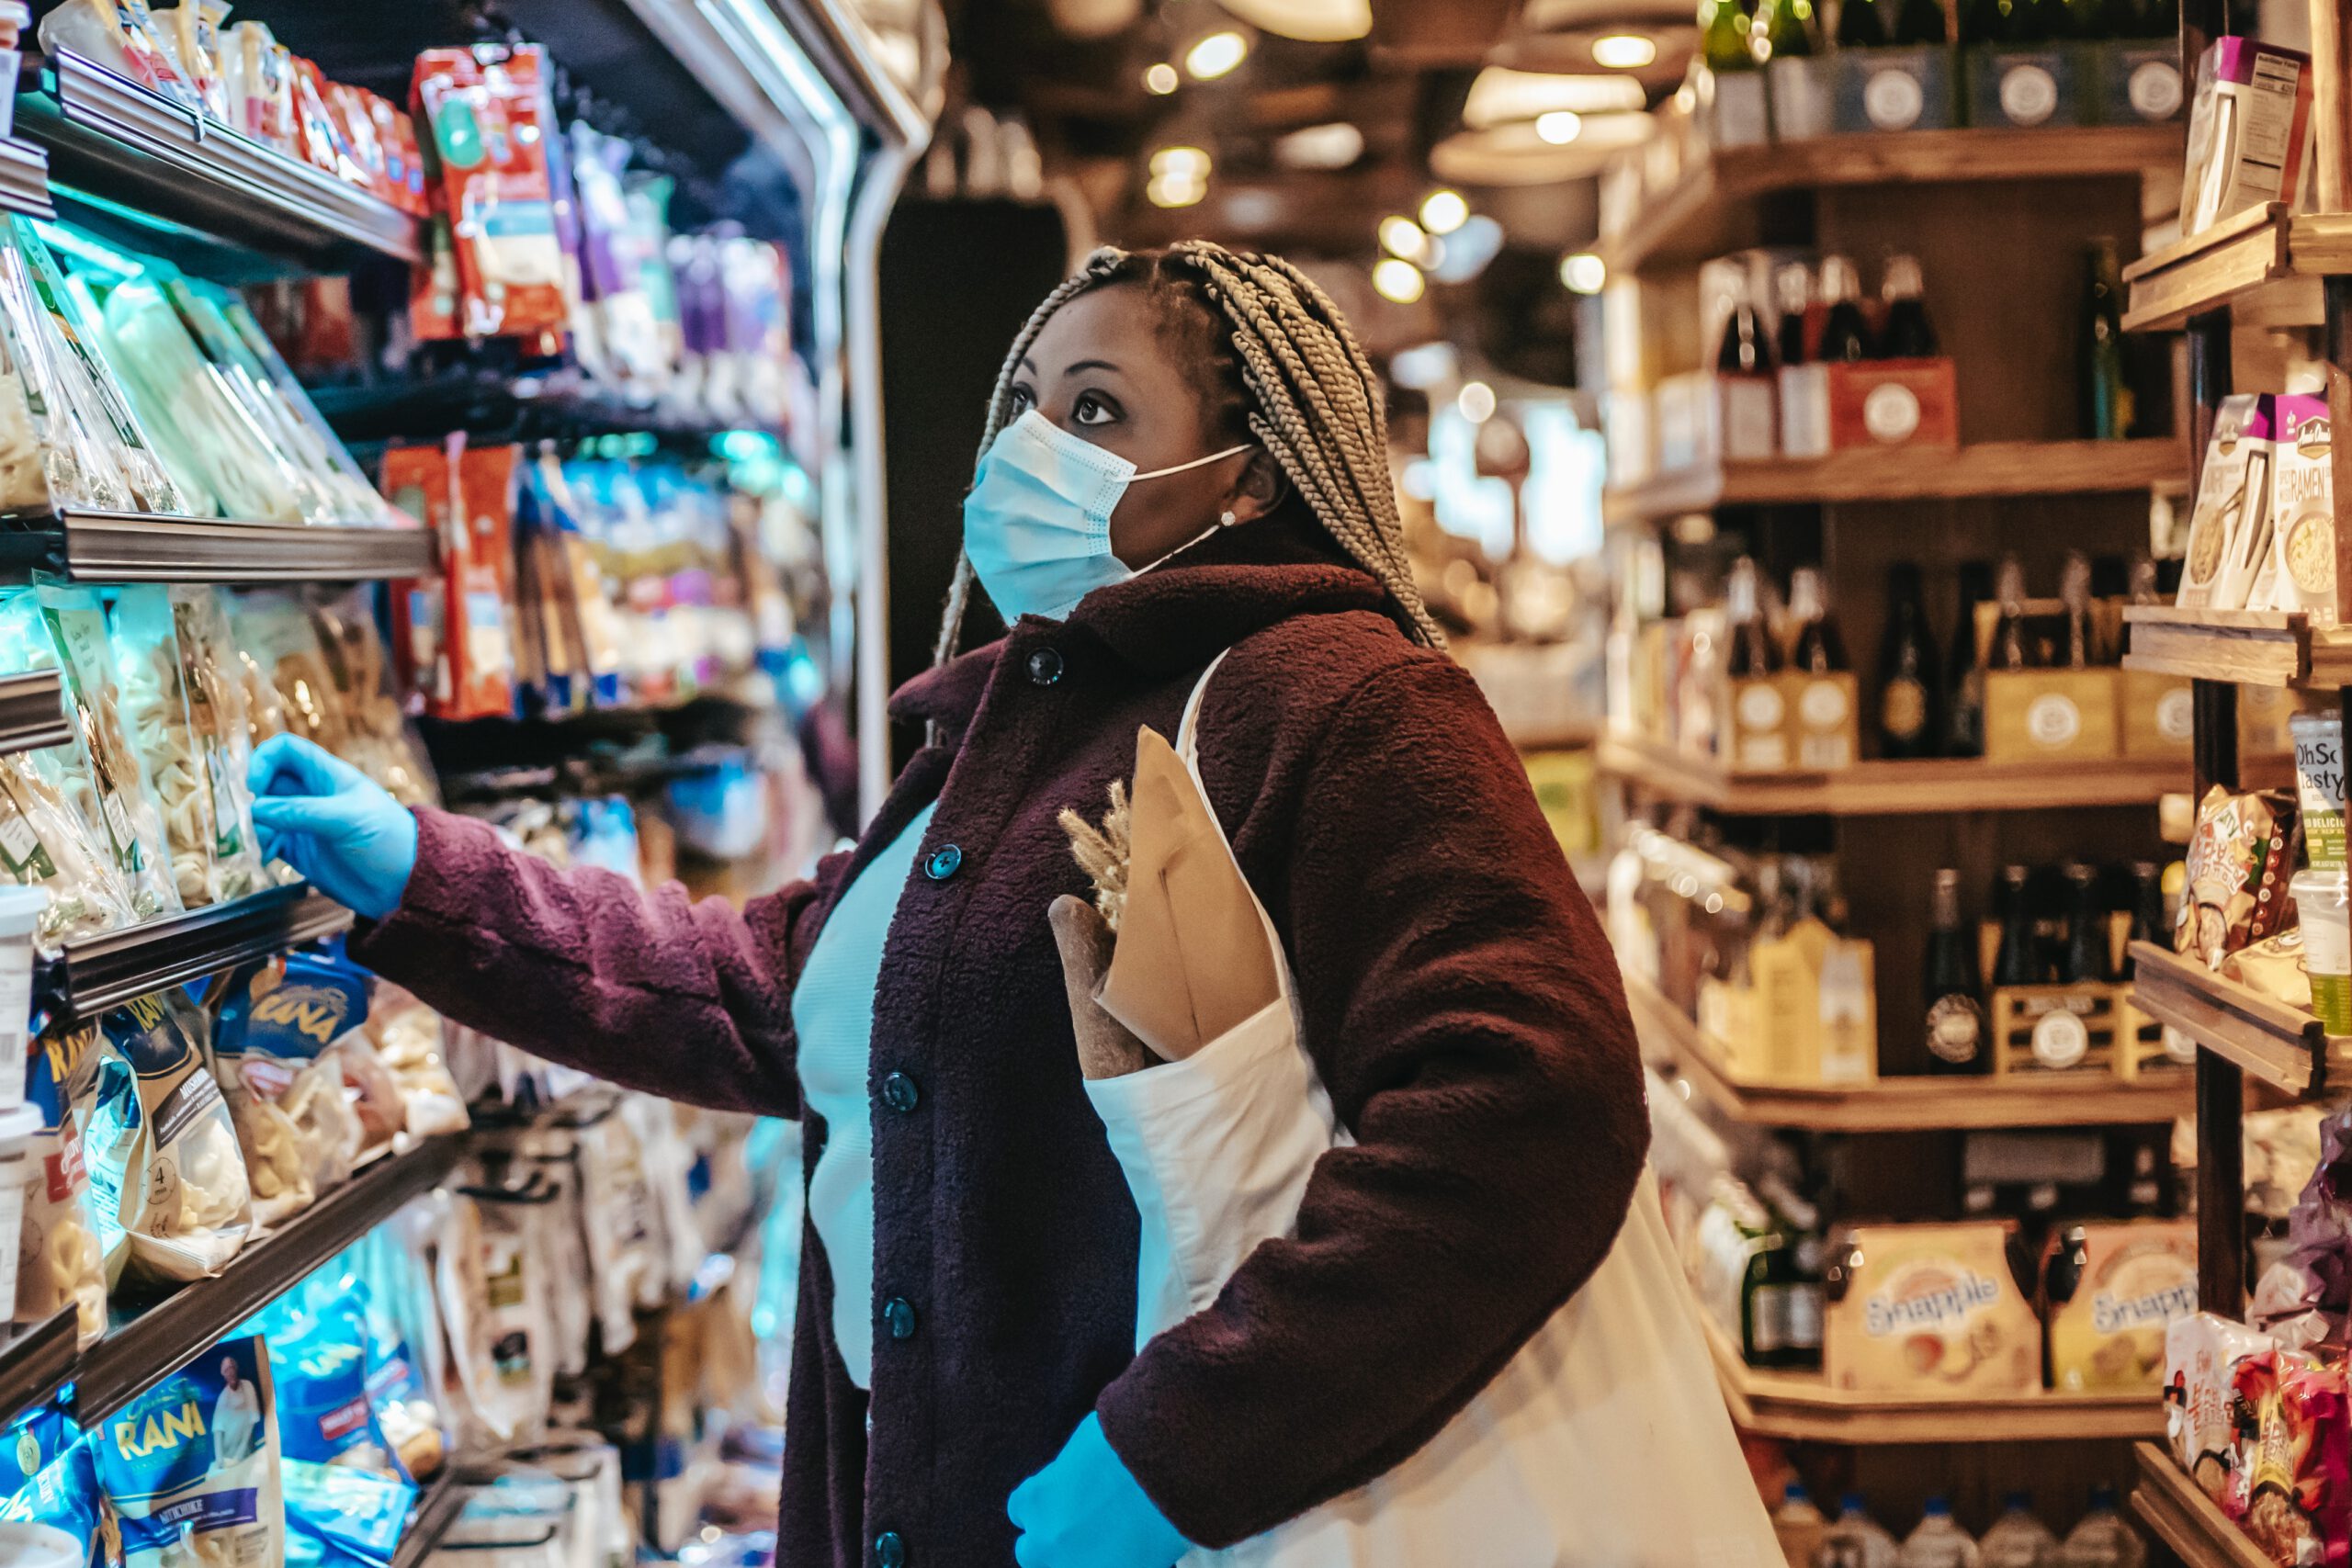 Q&A: How the pandemic will shape grocery shopping habits for years to come